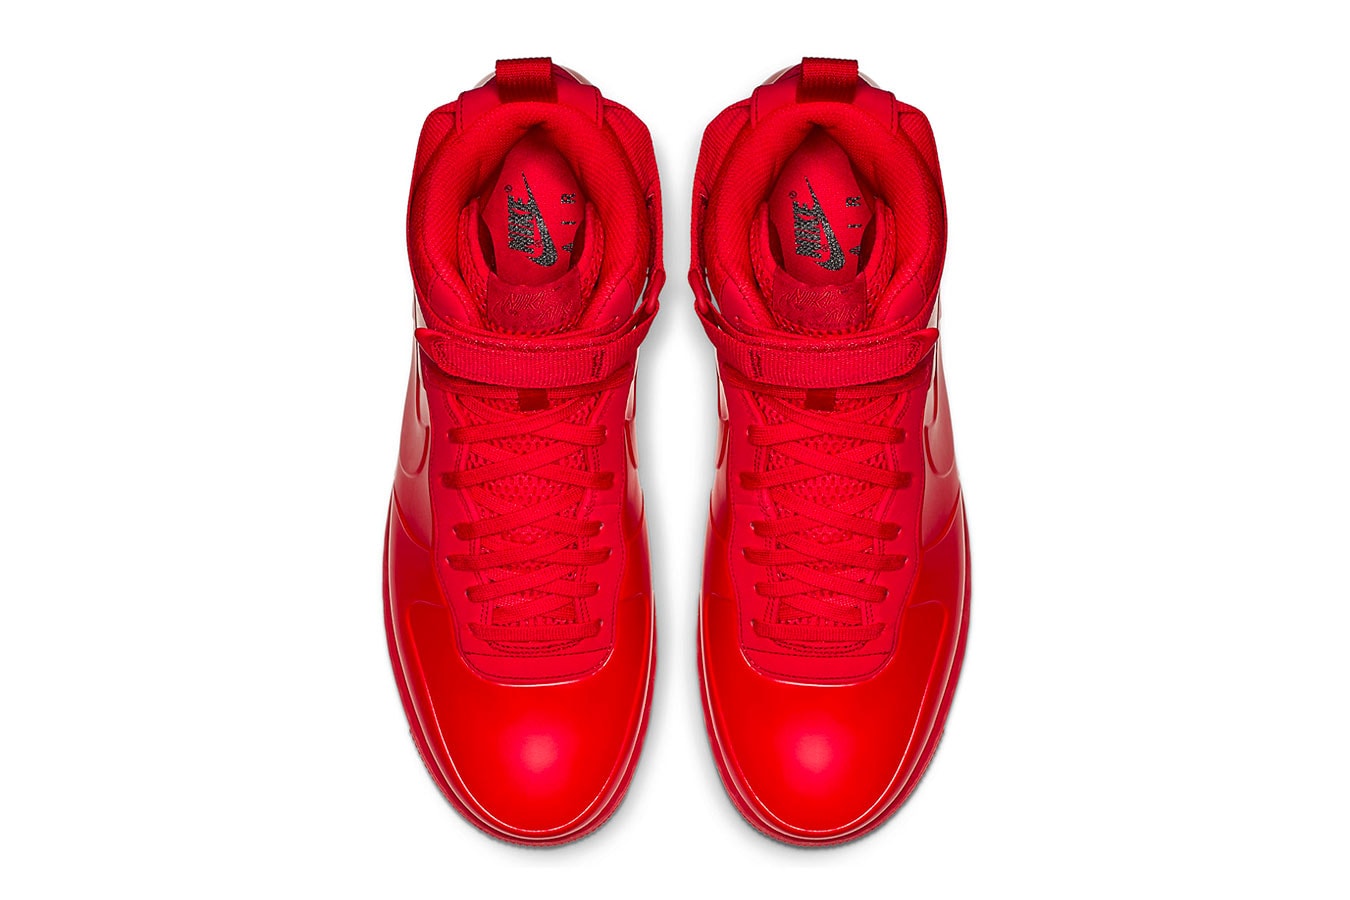 Nike Air Force 1 Foamposite "Red" Release Date price info sneaker colorway purchase buy online available now november 30 2018 Style Code: BV1172-600